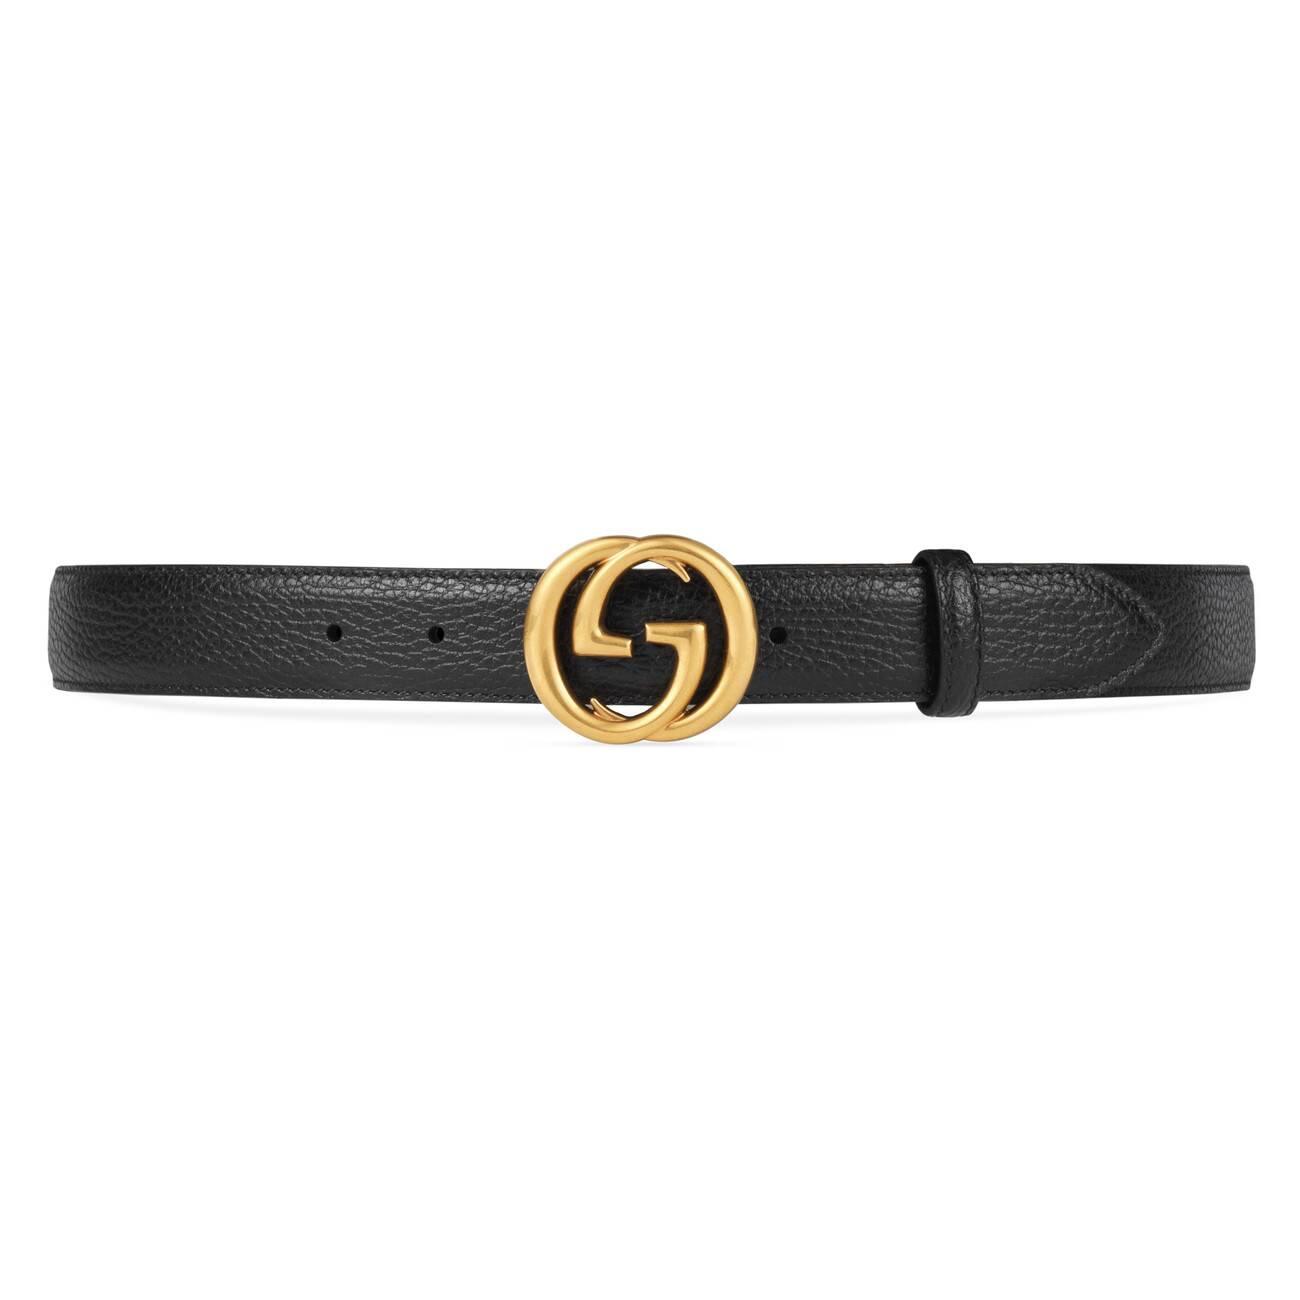 Gucci Leather Belt With Interlocking G Buckle in White for Men - Lyst